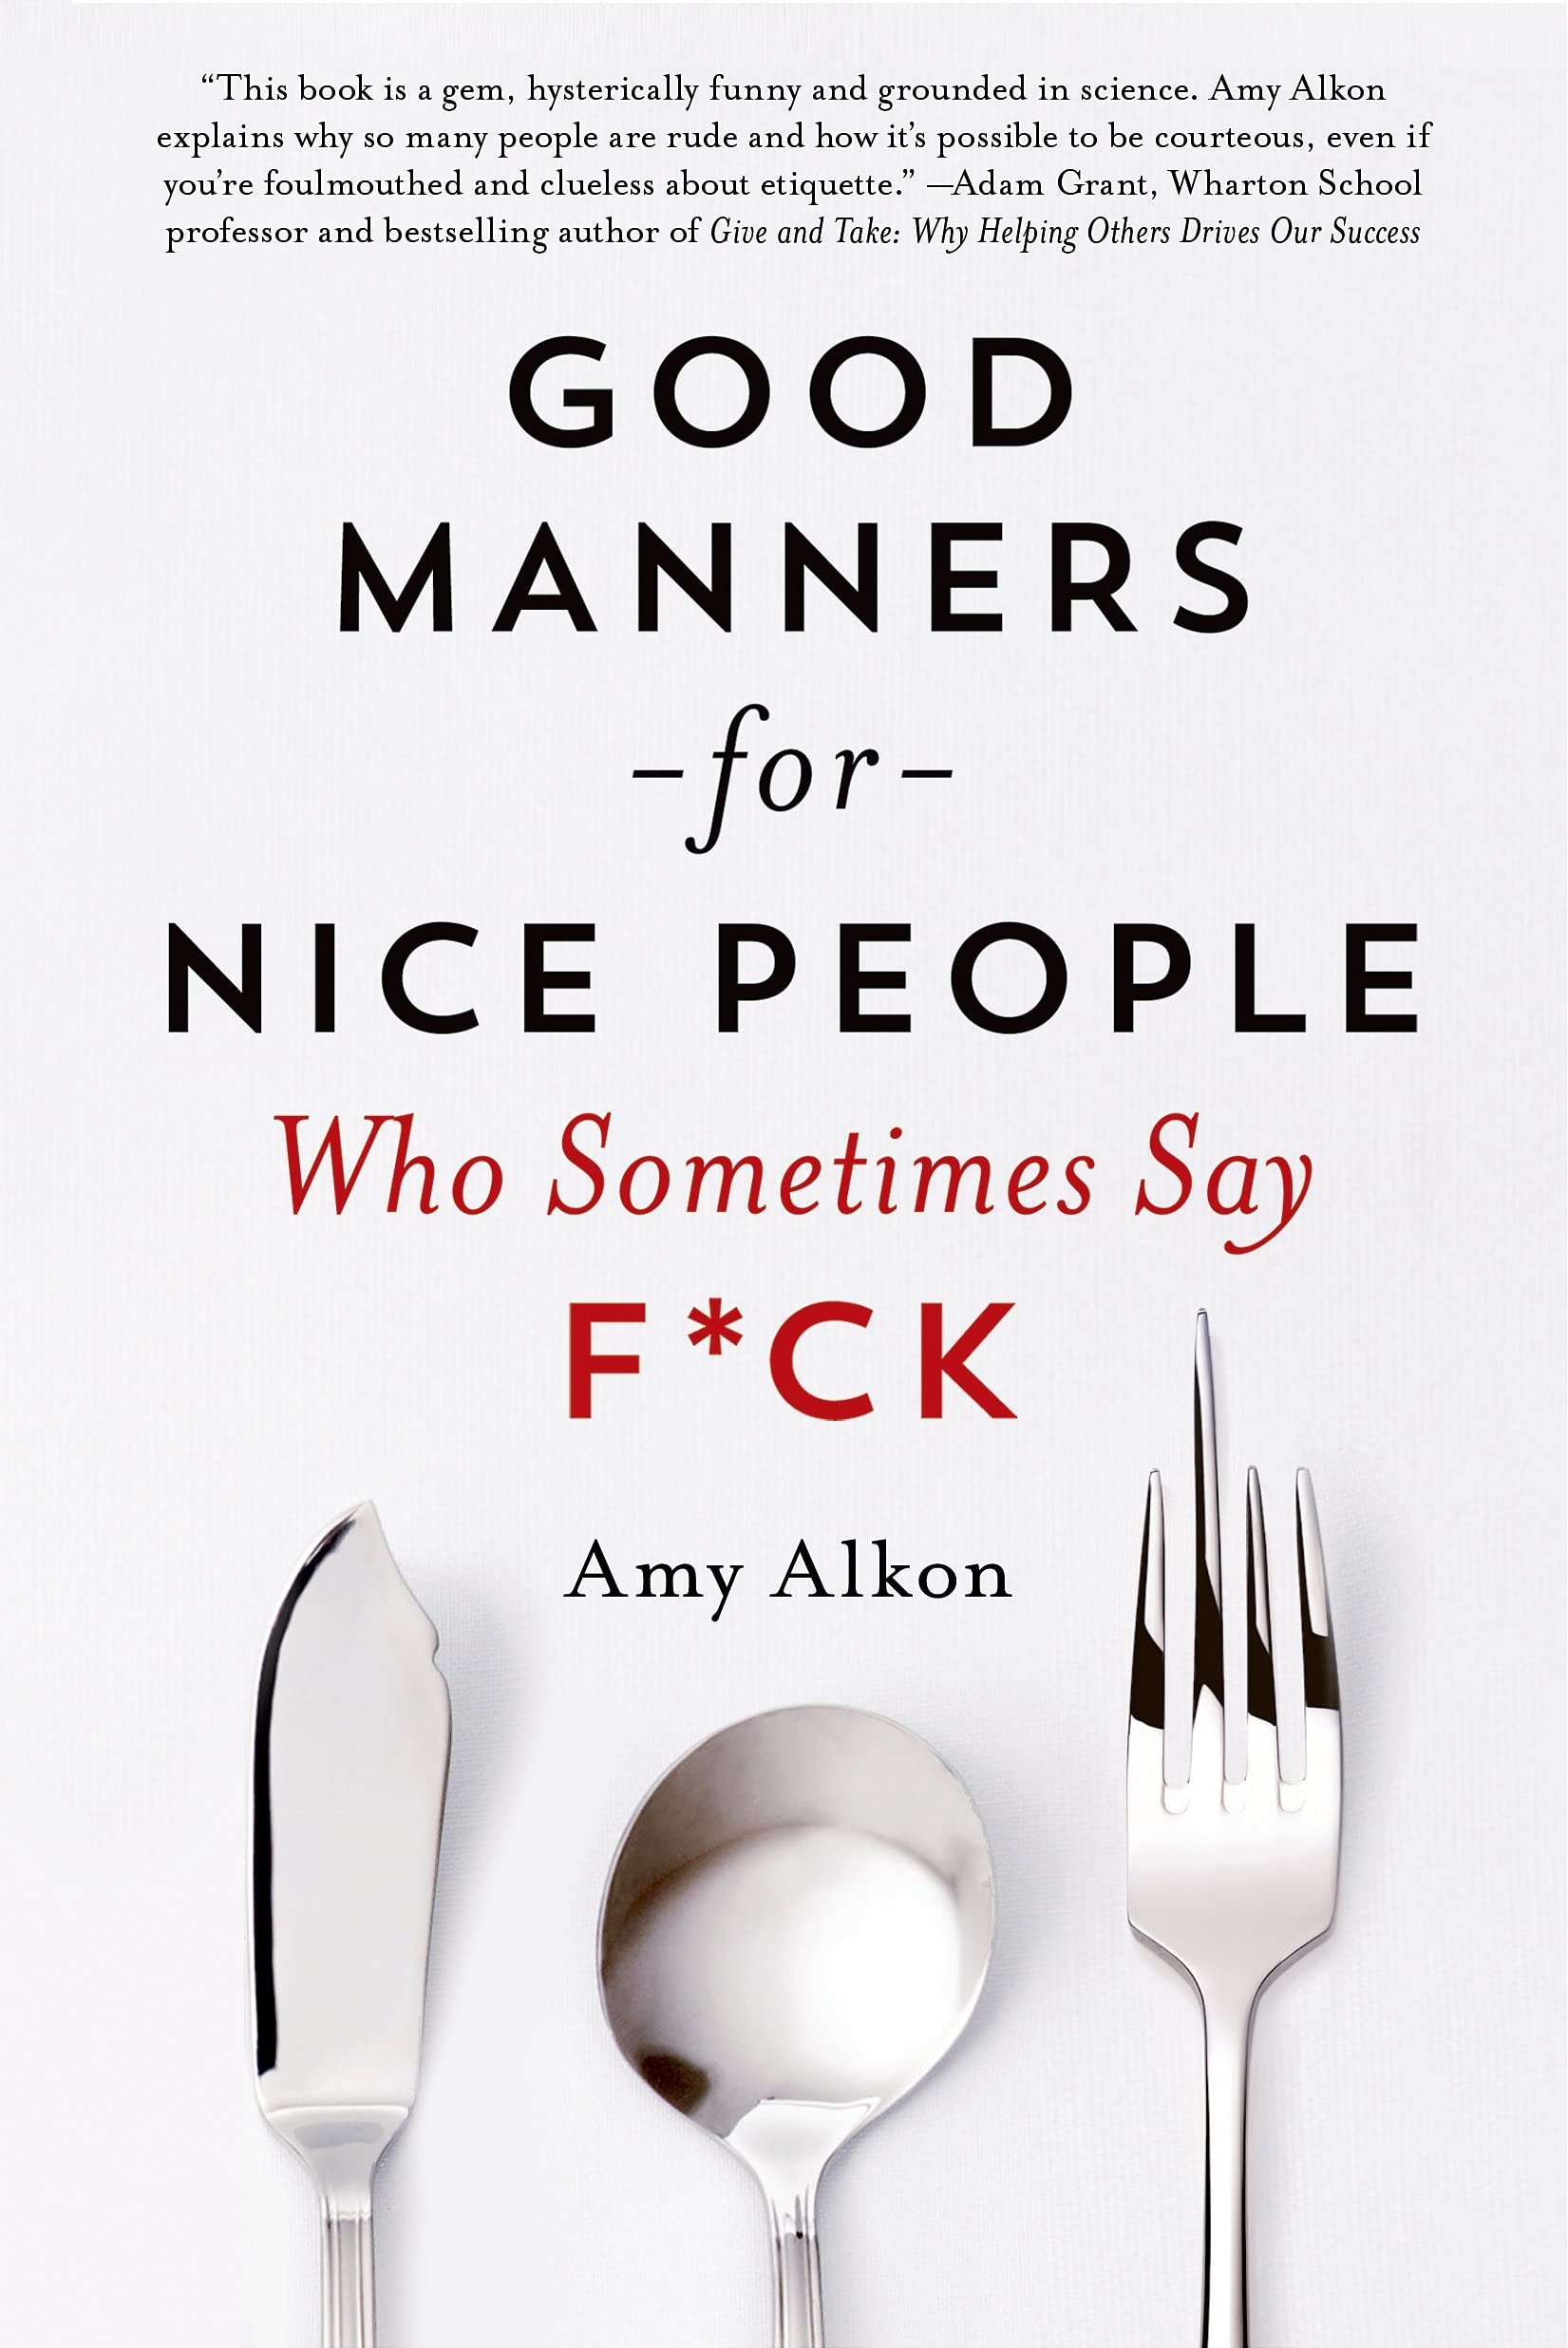 Amy Alkon - Good Manners for Nice People Who Sometimes Say Fuck